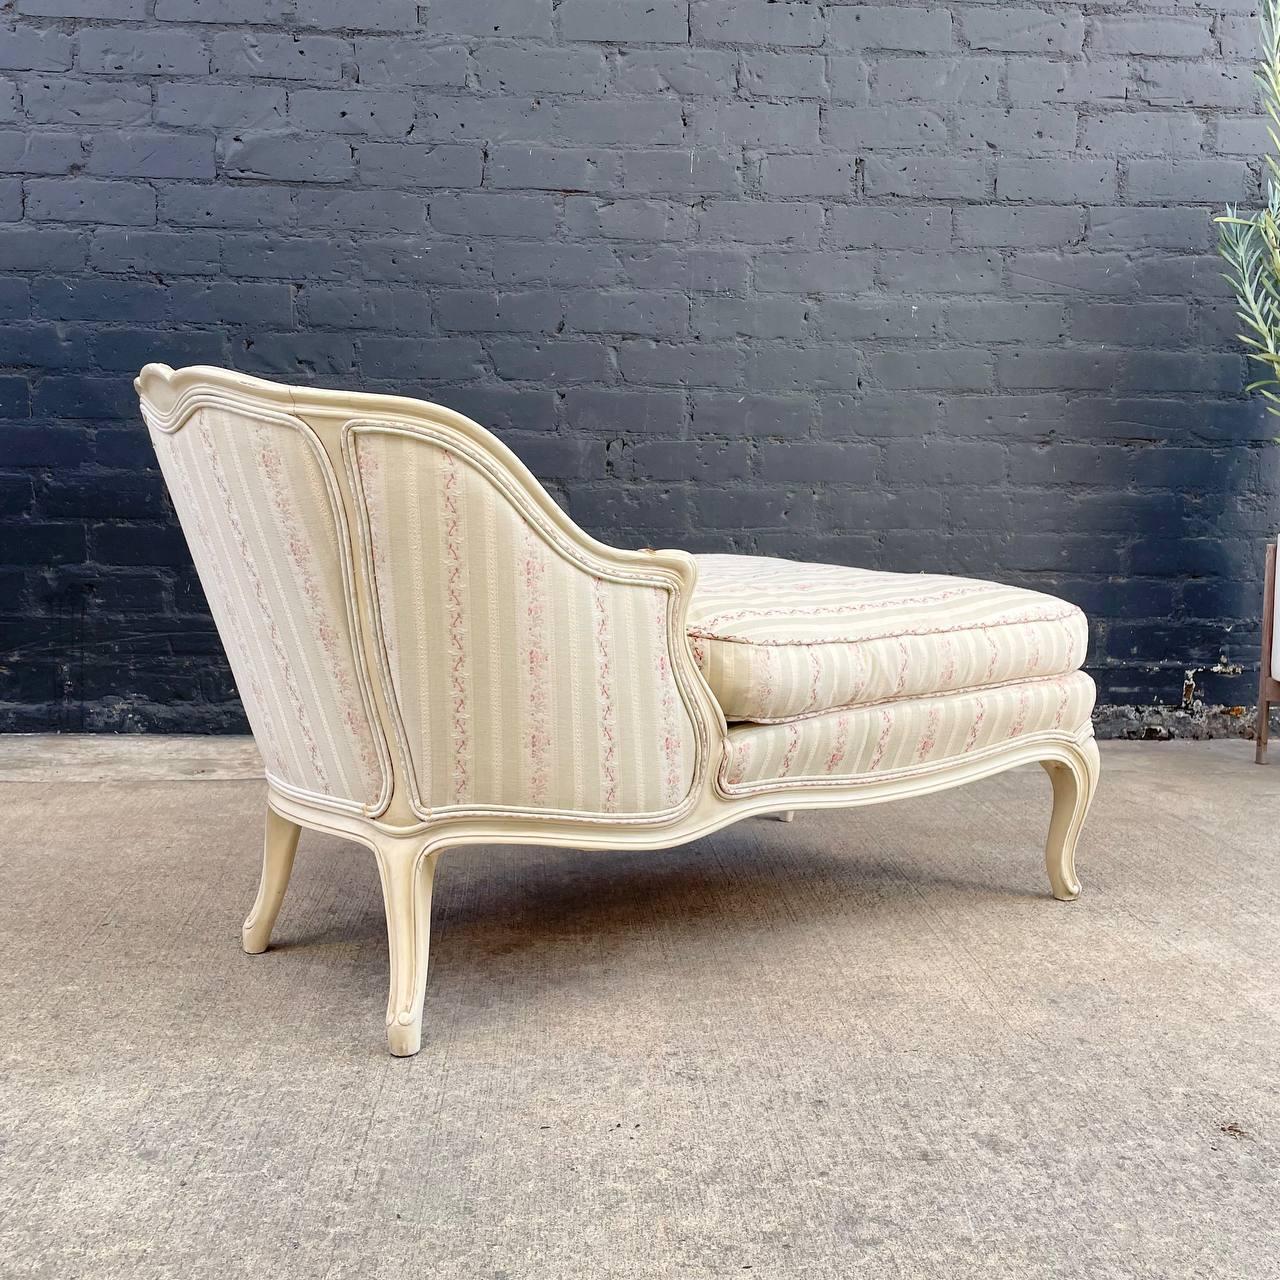 American Vintage French Provincial Style Chaise Lounge Chair